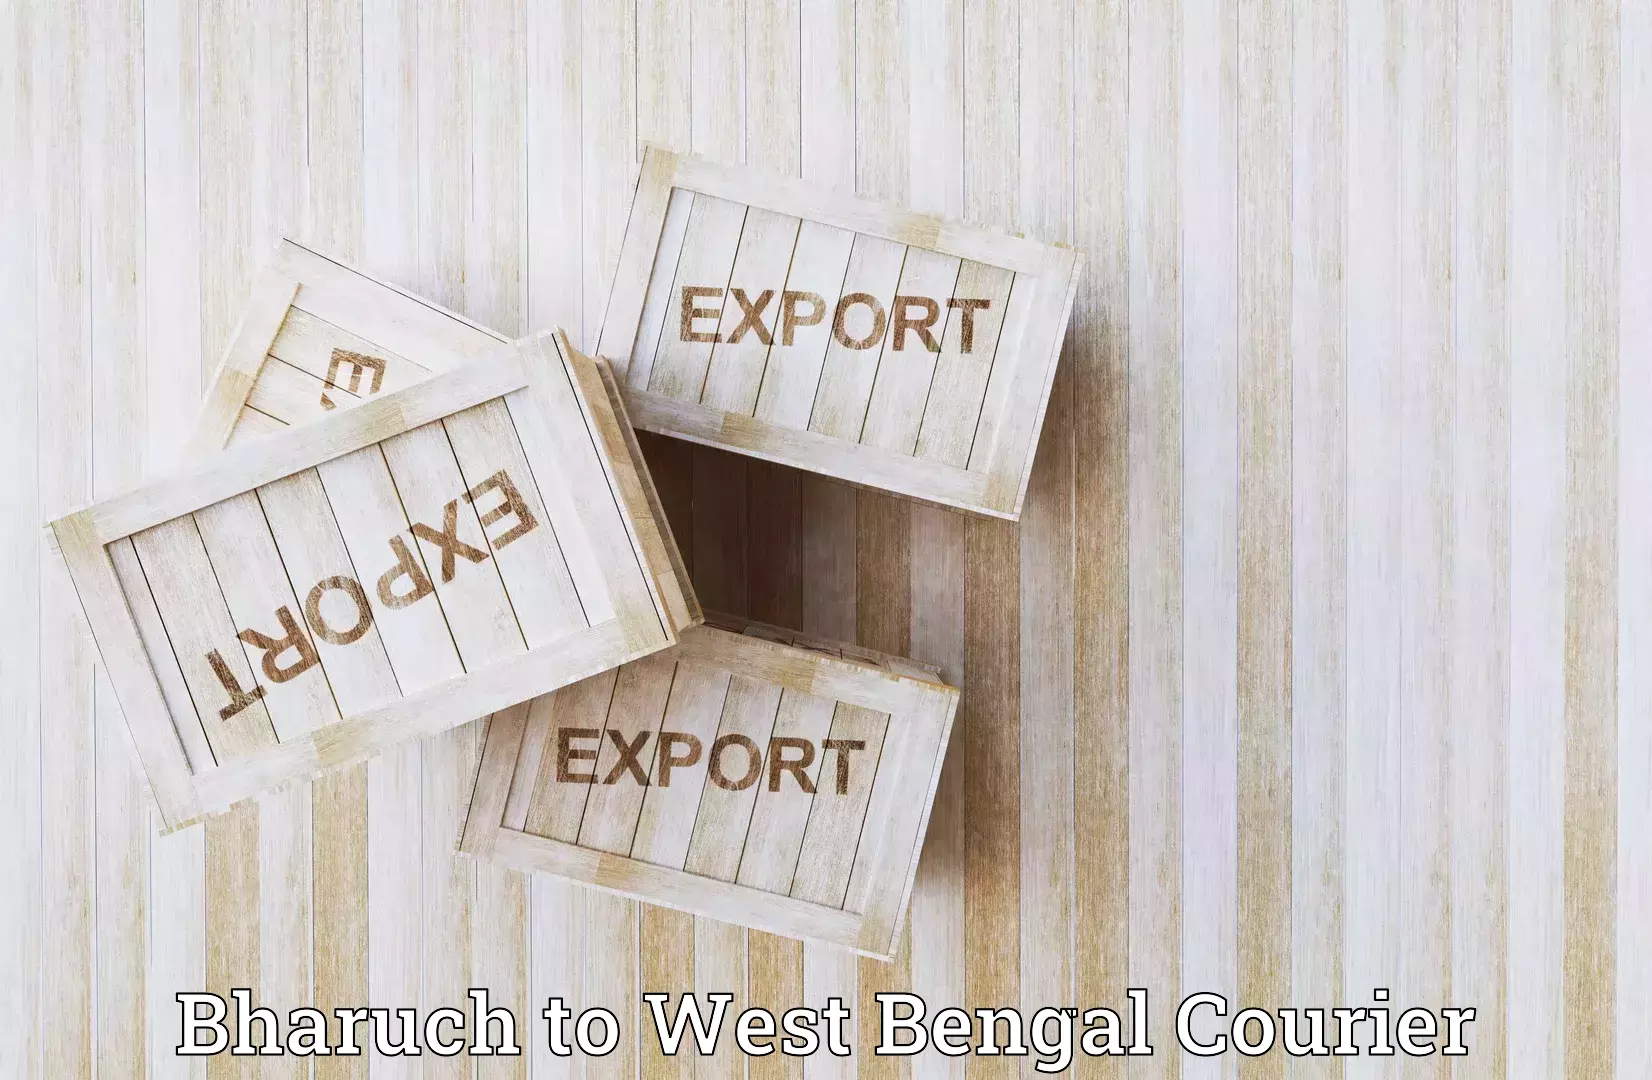 Global delivery options Bharuch to Kolkata Port